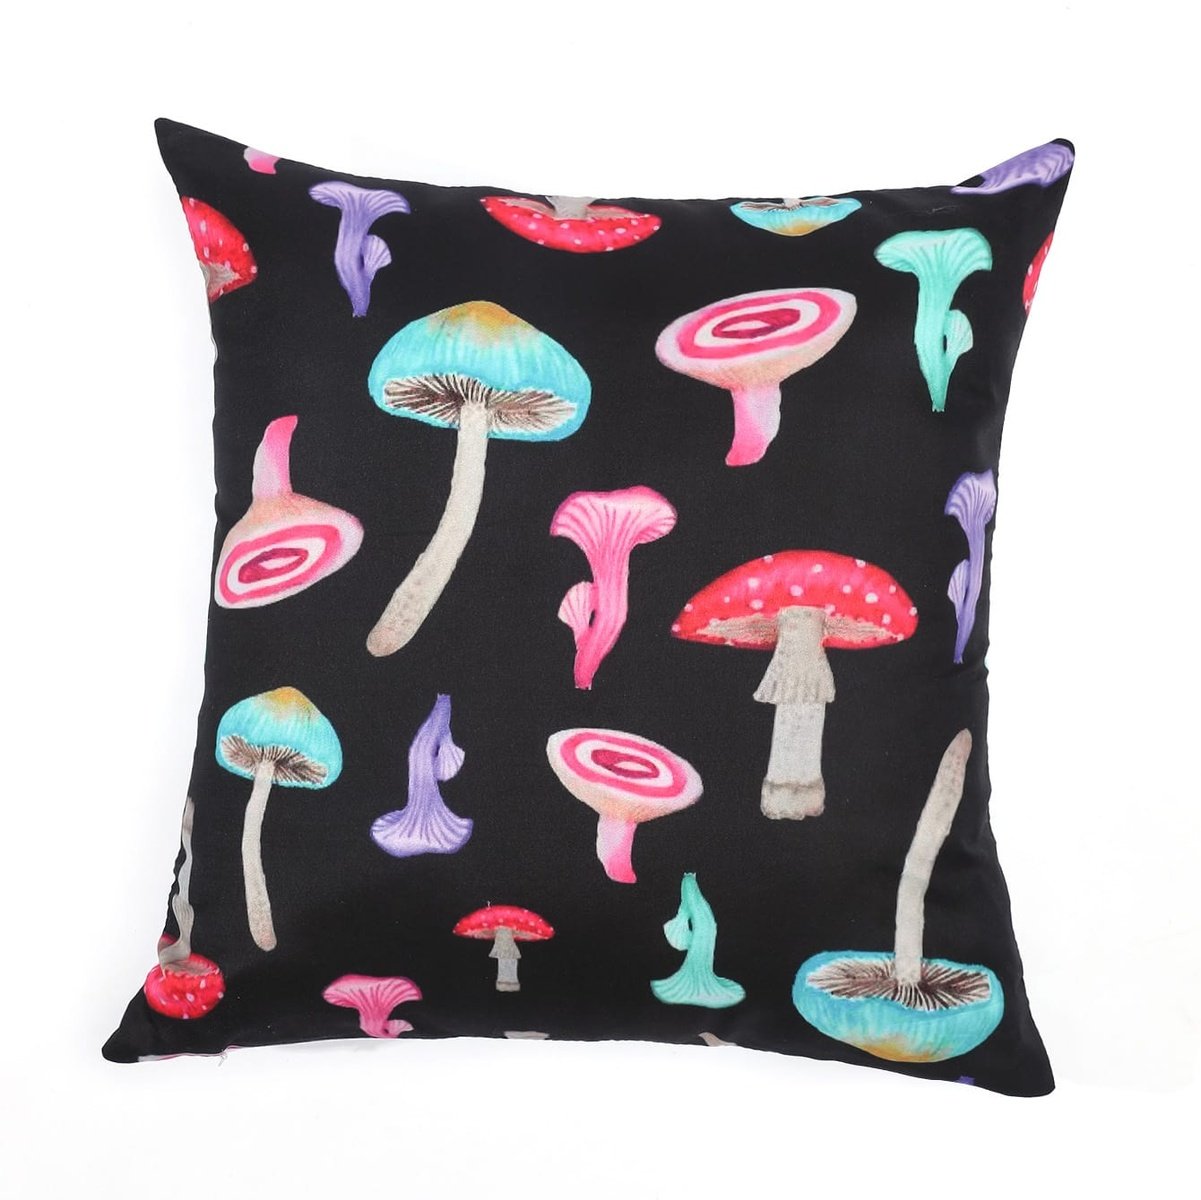 Mushroom Print Cushion Cover Without Filler